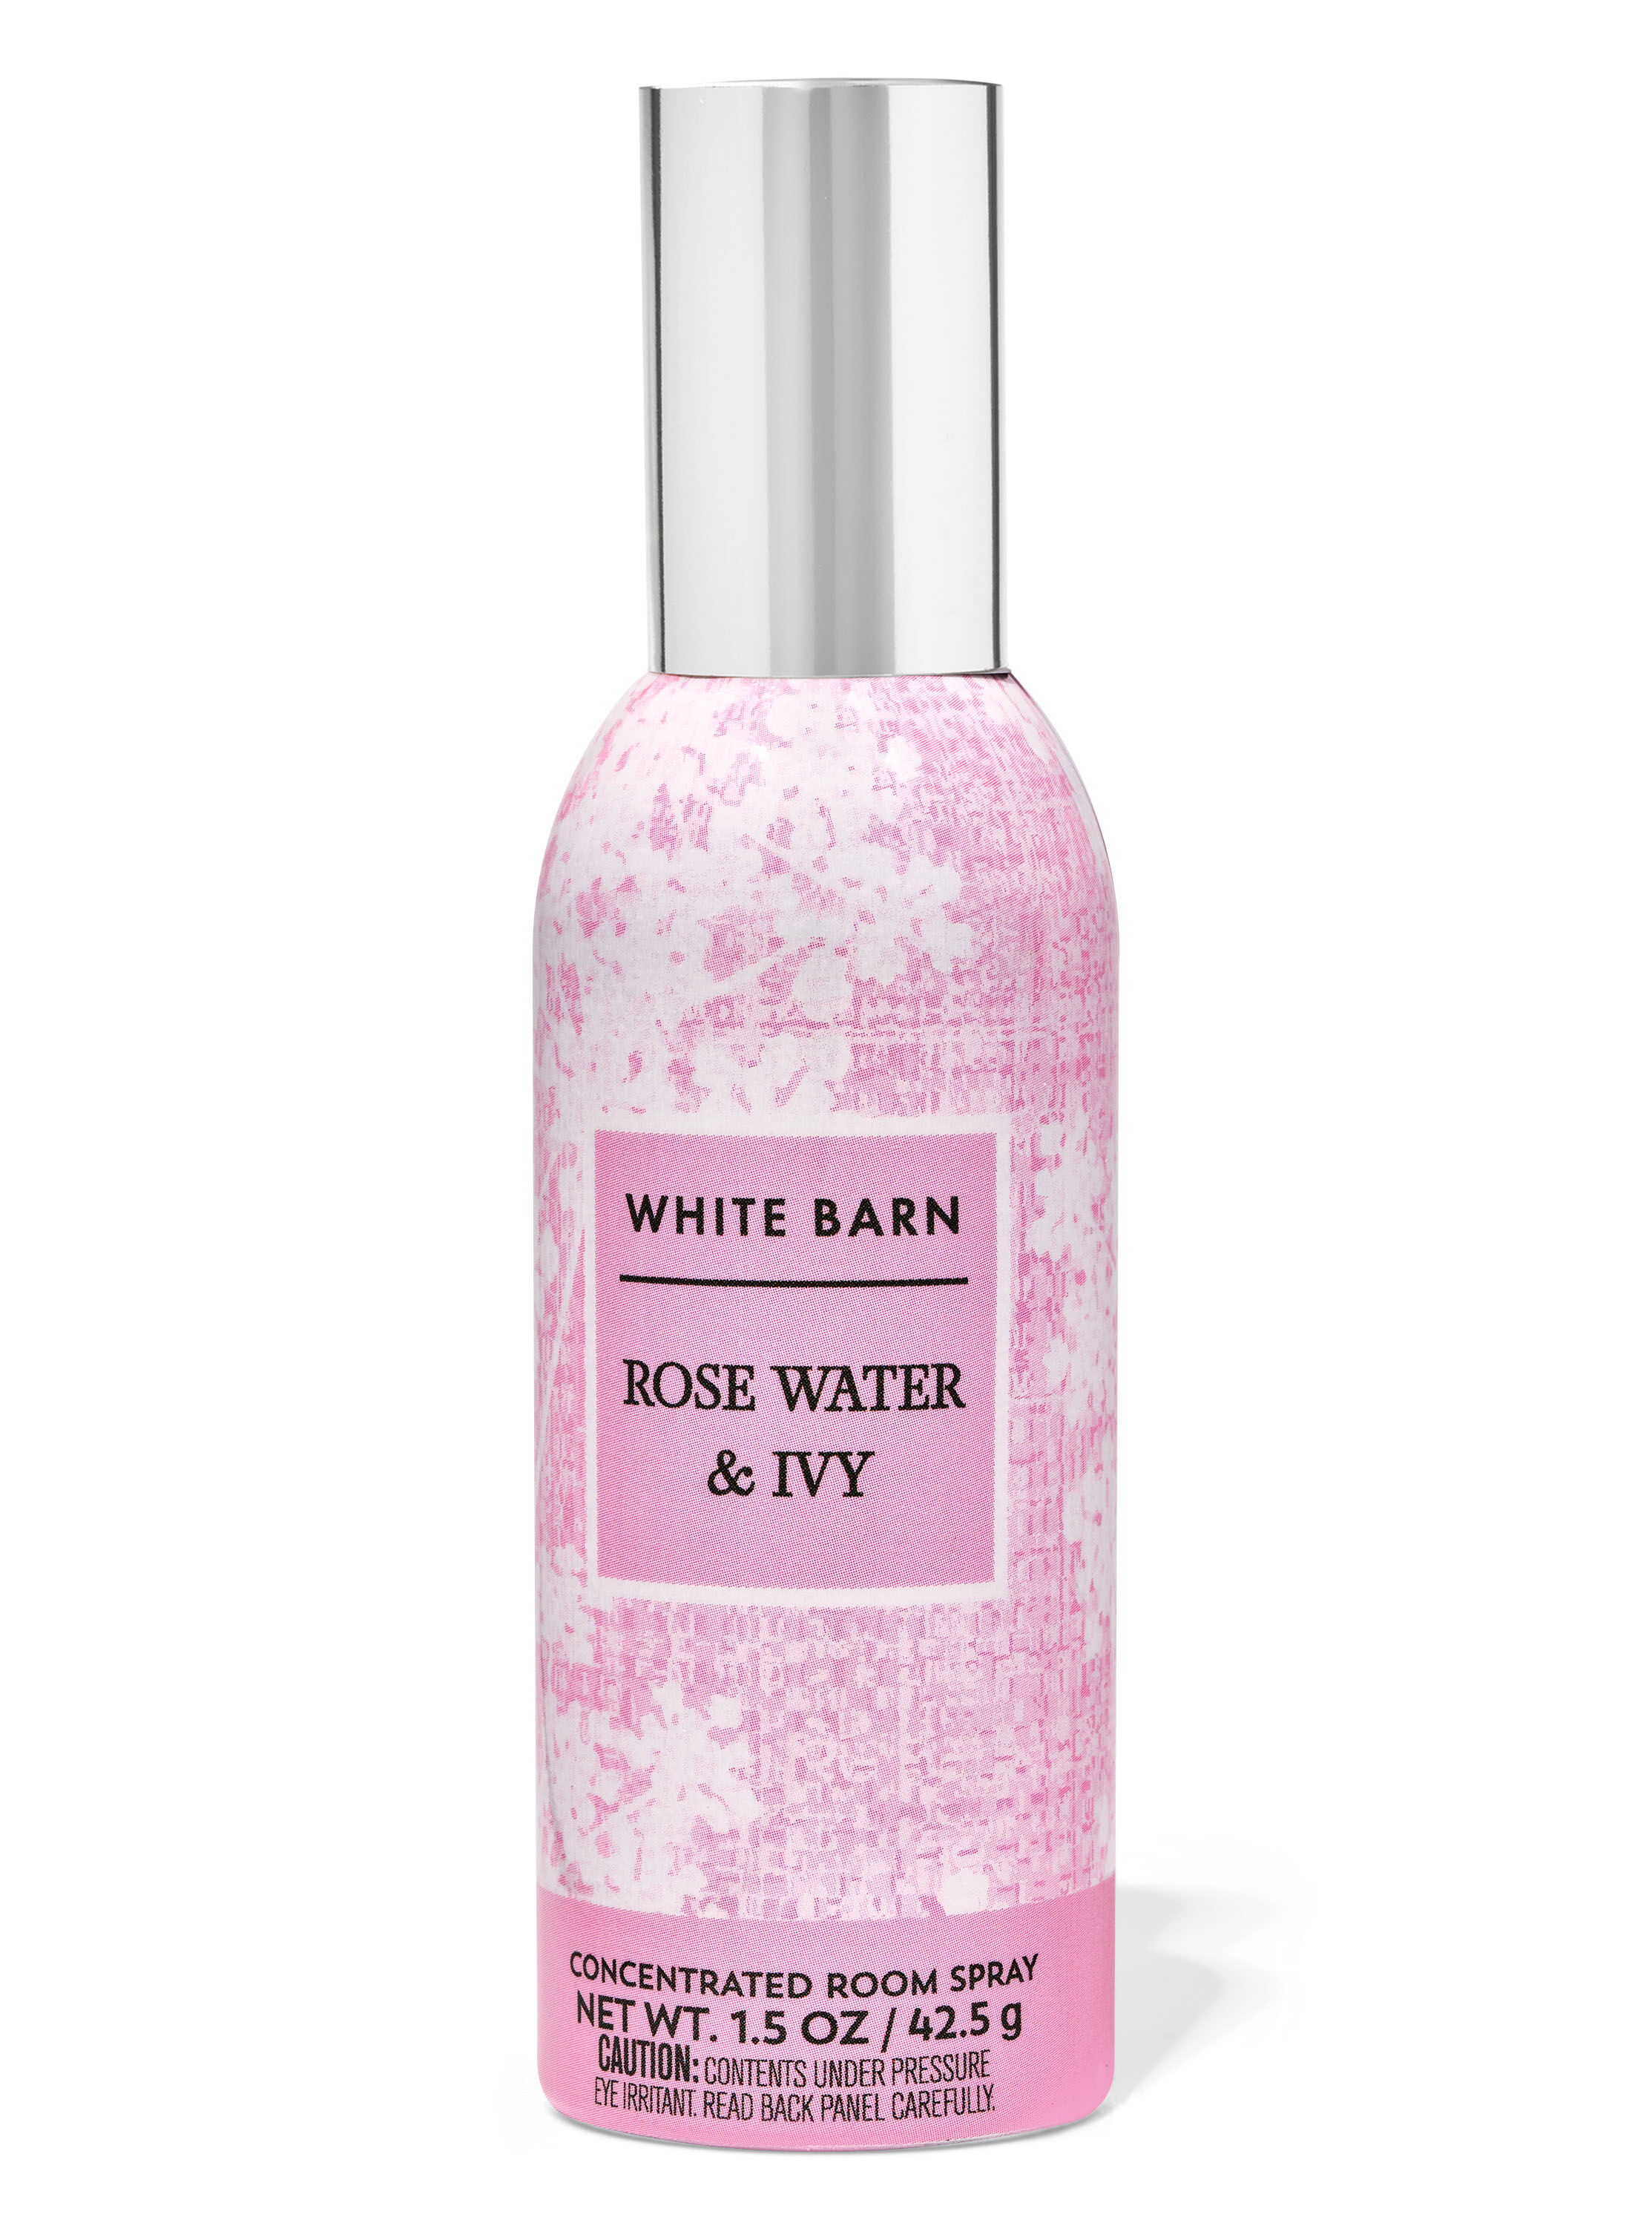 Rose Water & Ivy Concentrated Room Spray